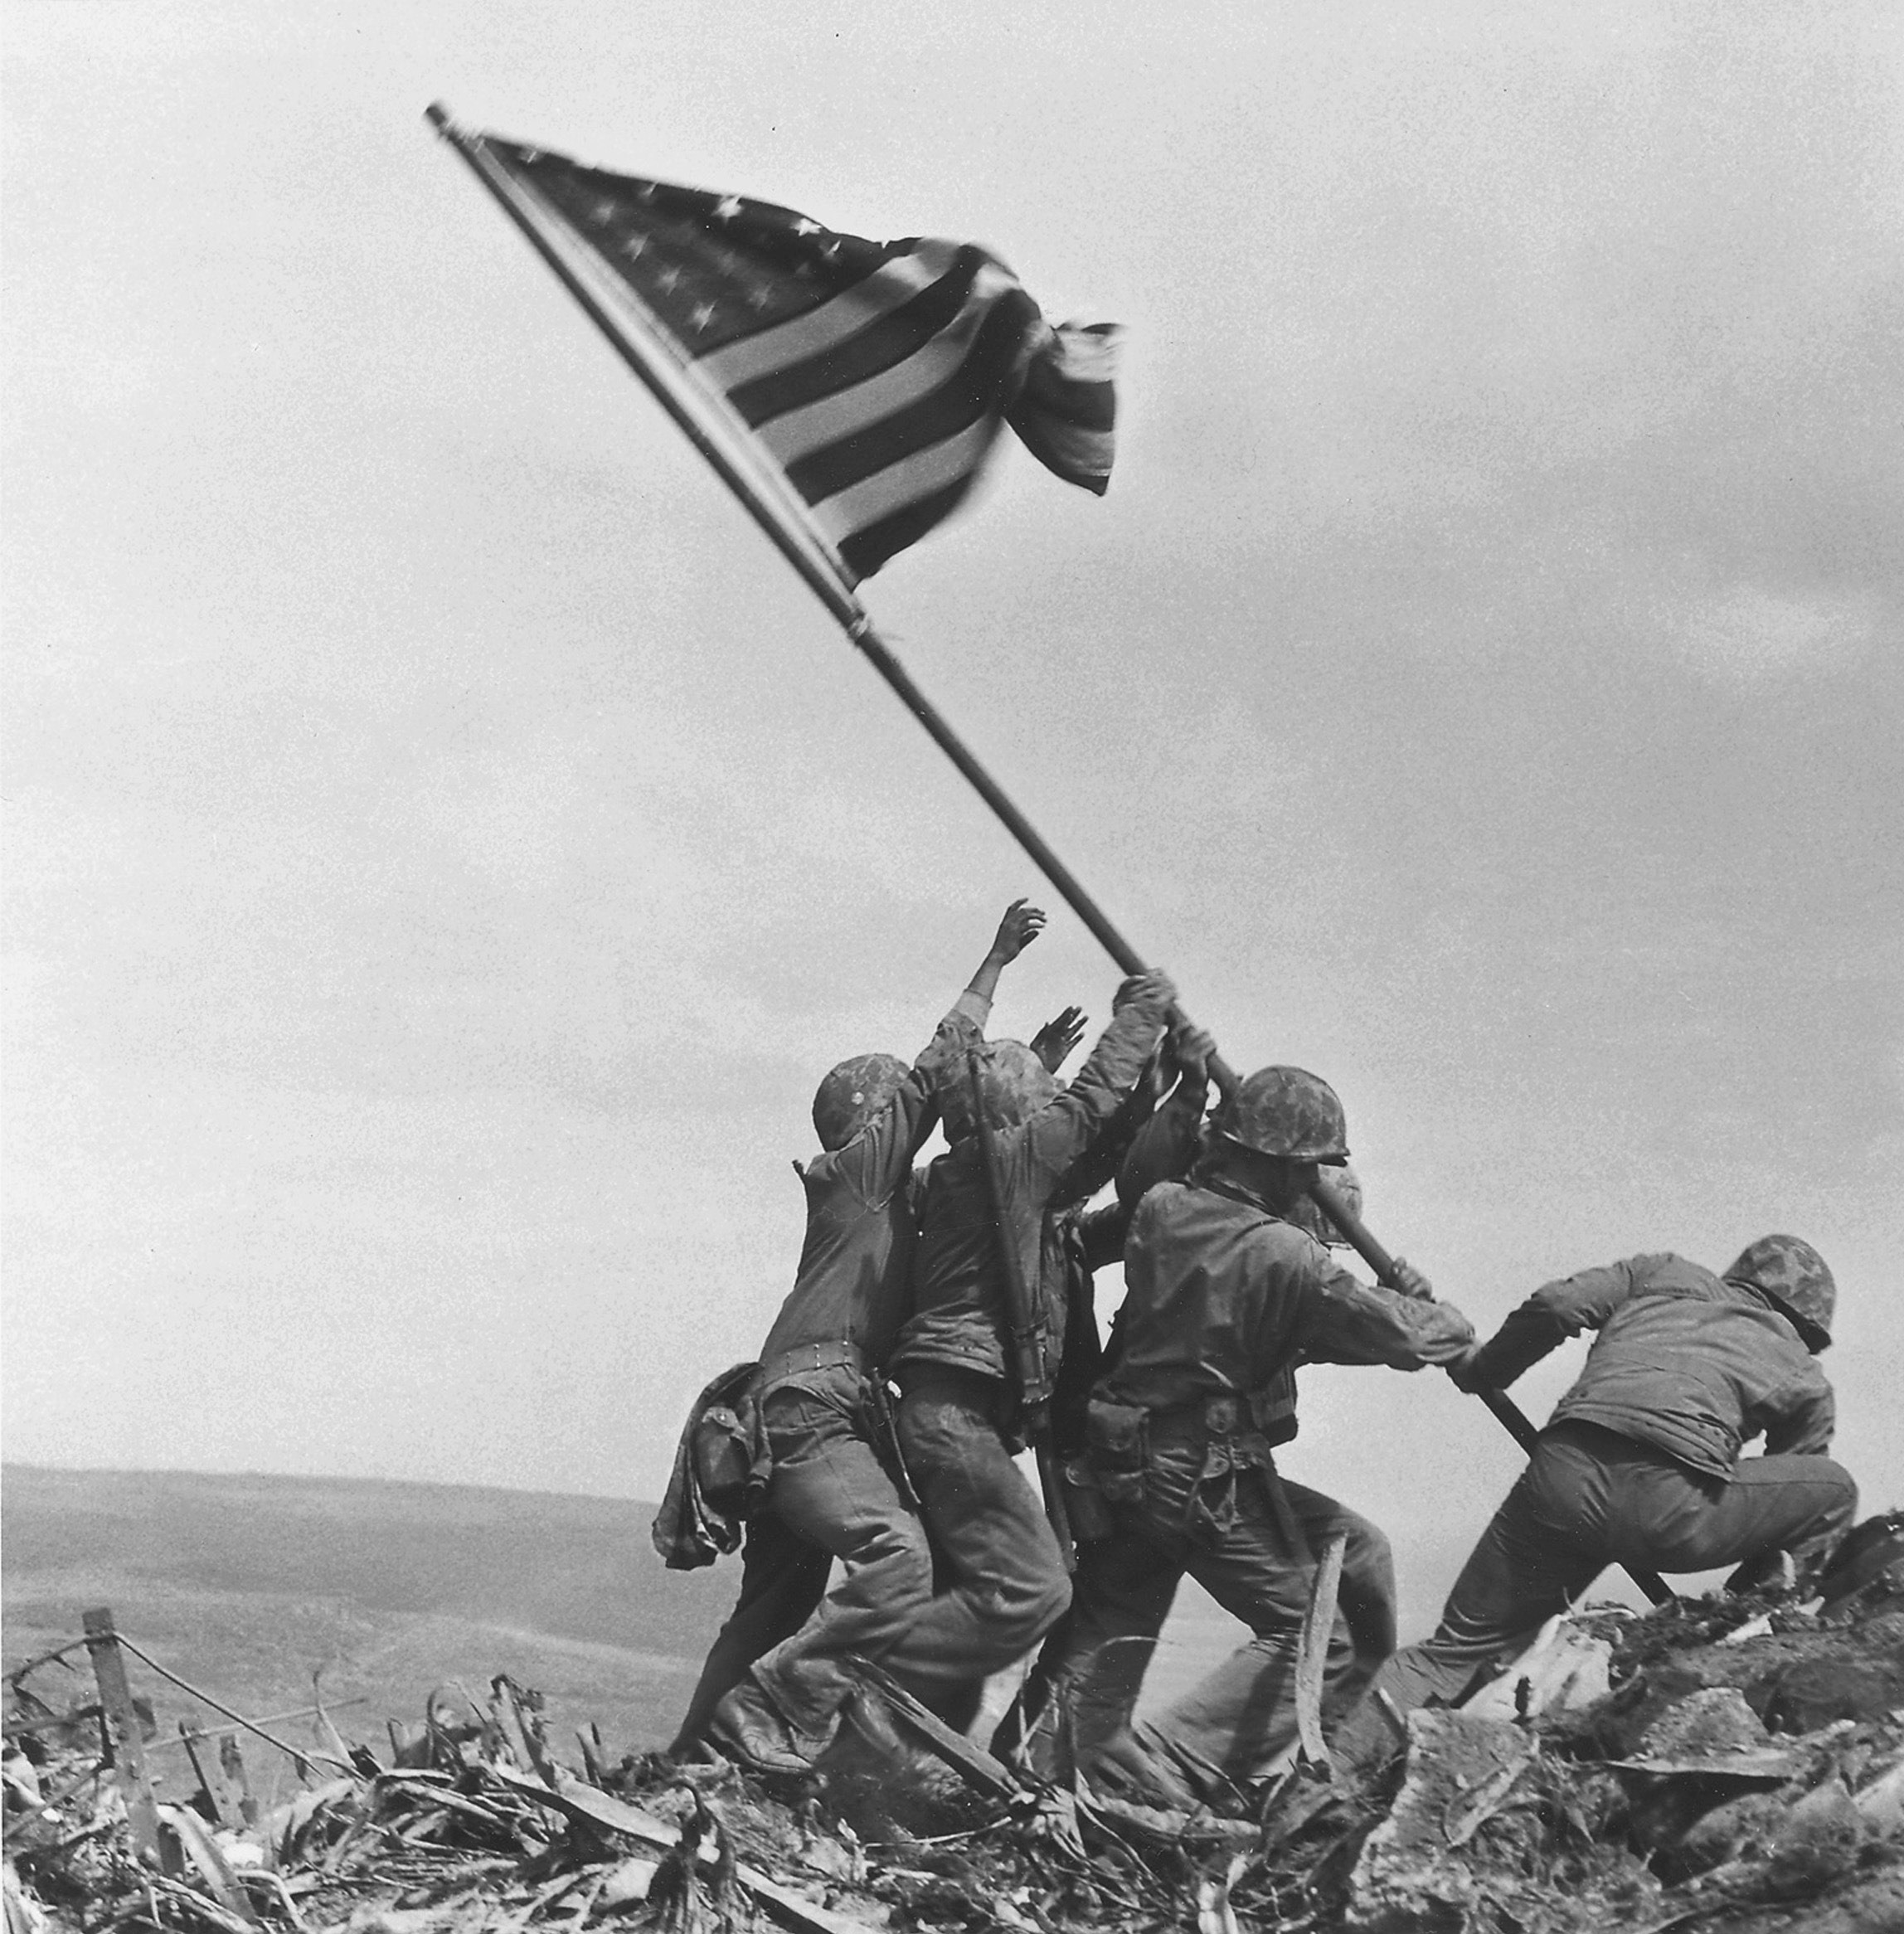 U.S. service members raise the American flag atop Mt. Suribachi in Iwo Jima, Japan, on Feb. 23, 1945. The Marine Corps is investigating whether some of the men in the photo have been misidentified.